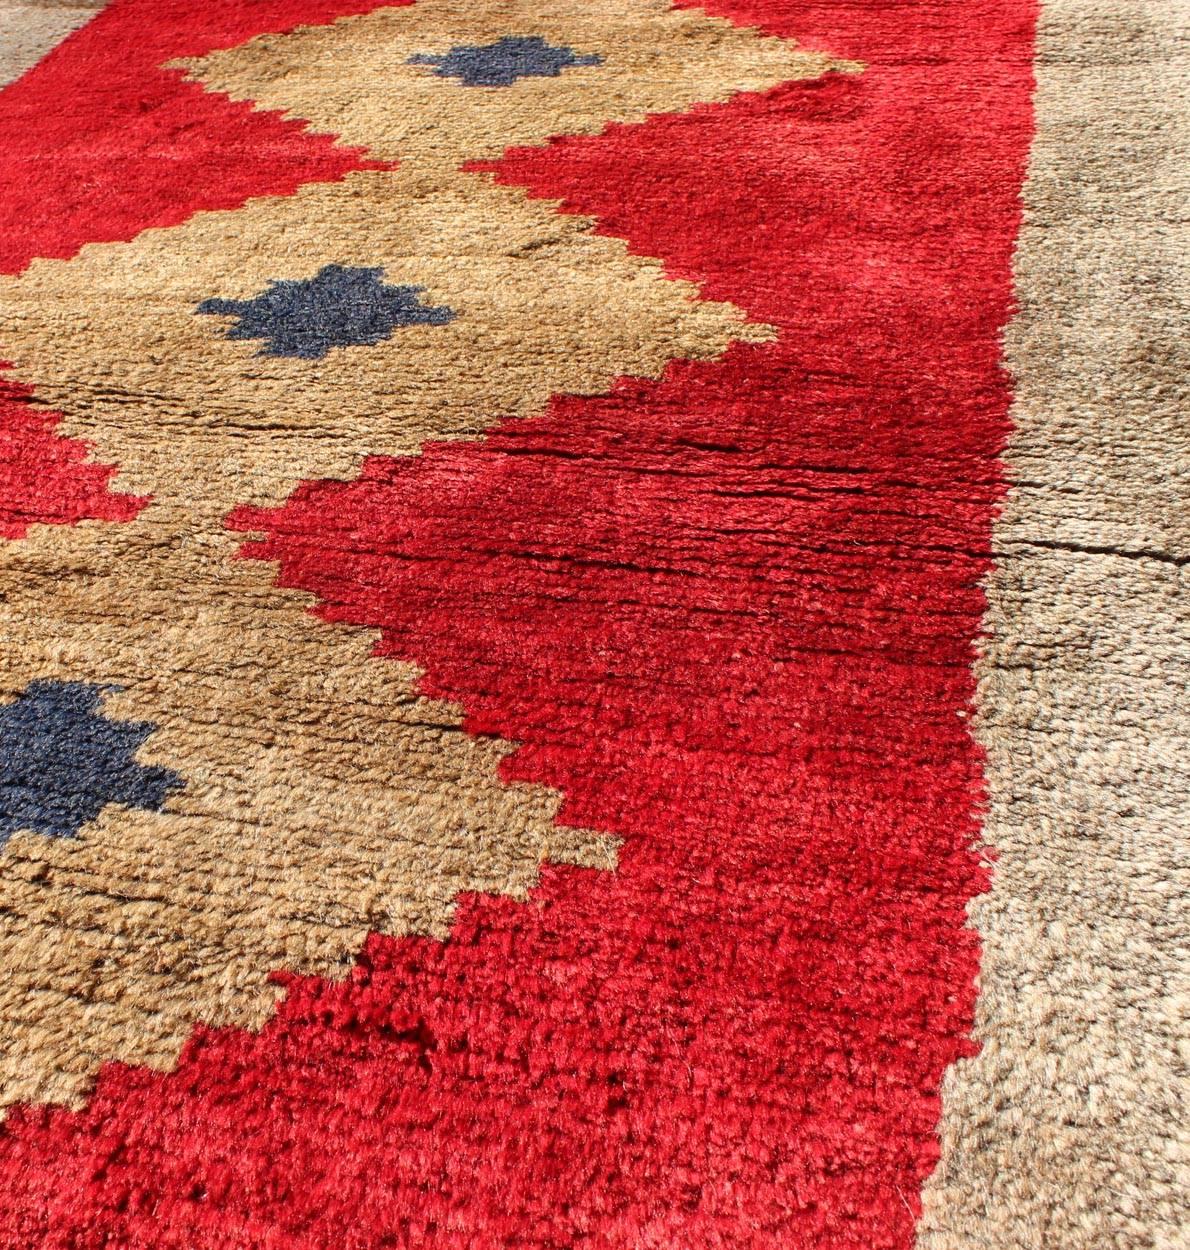 Mid-20th Century Midcentury Turkish Tulu Rug with Diamond Design in Bright Red and Tan Colors For Sale